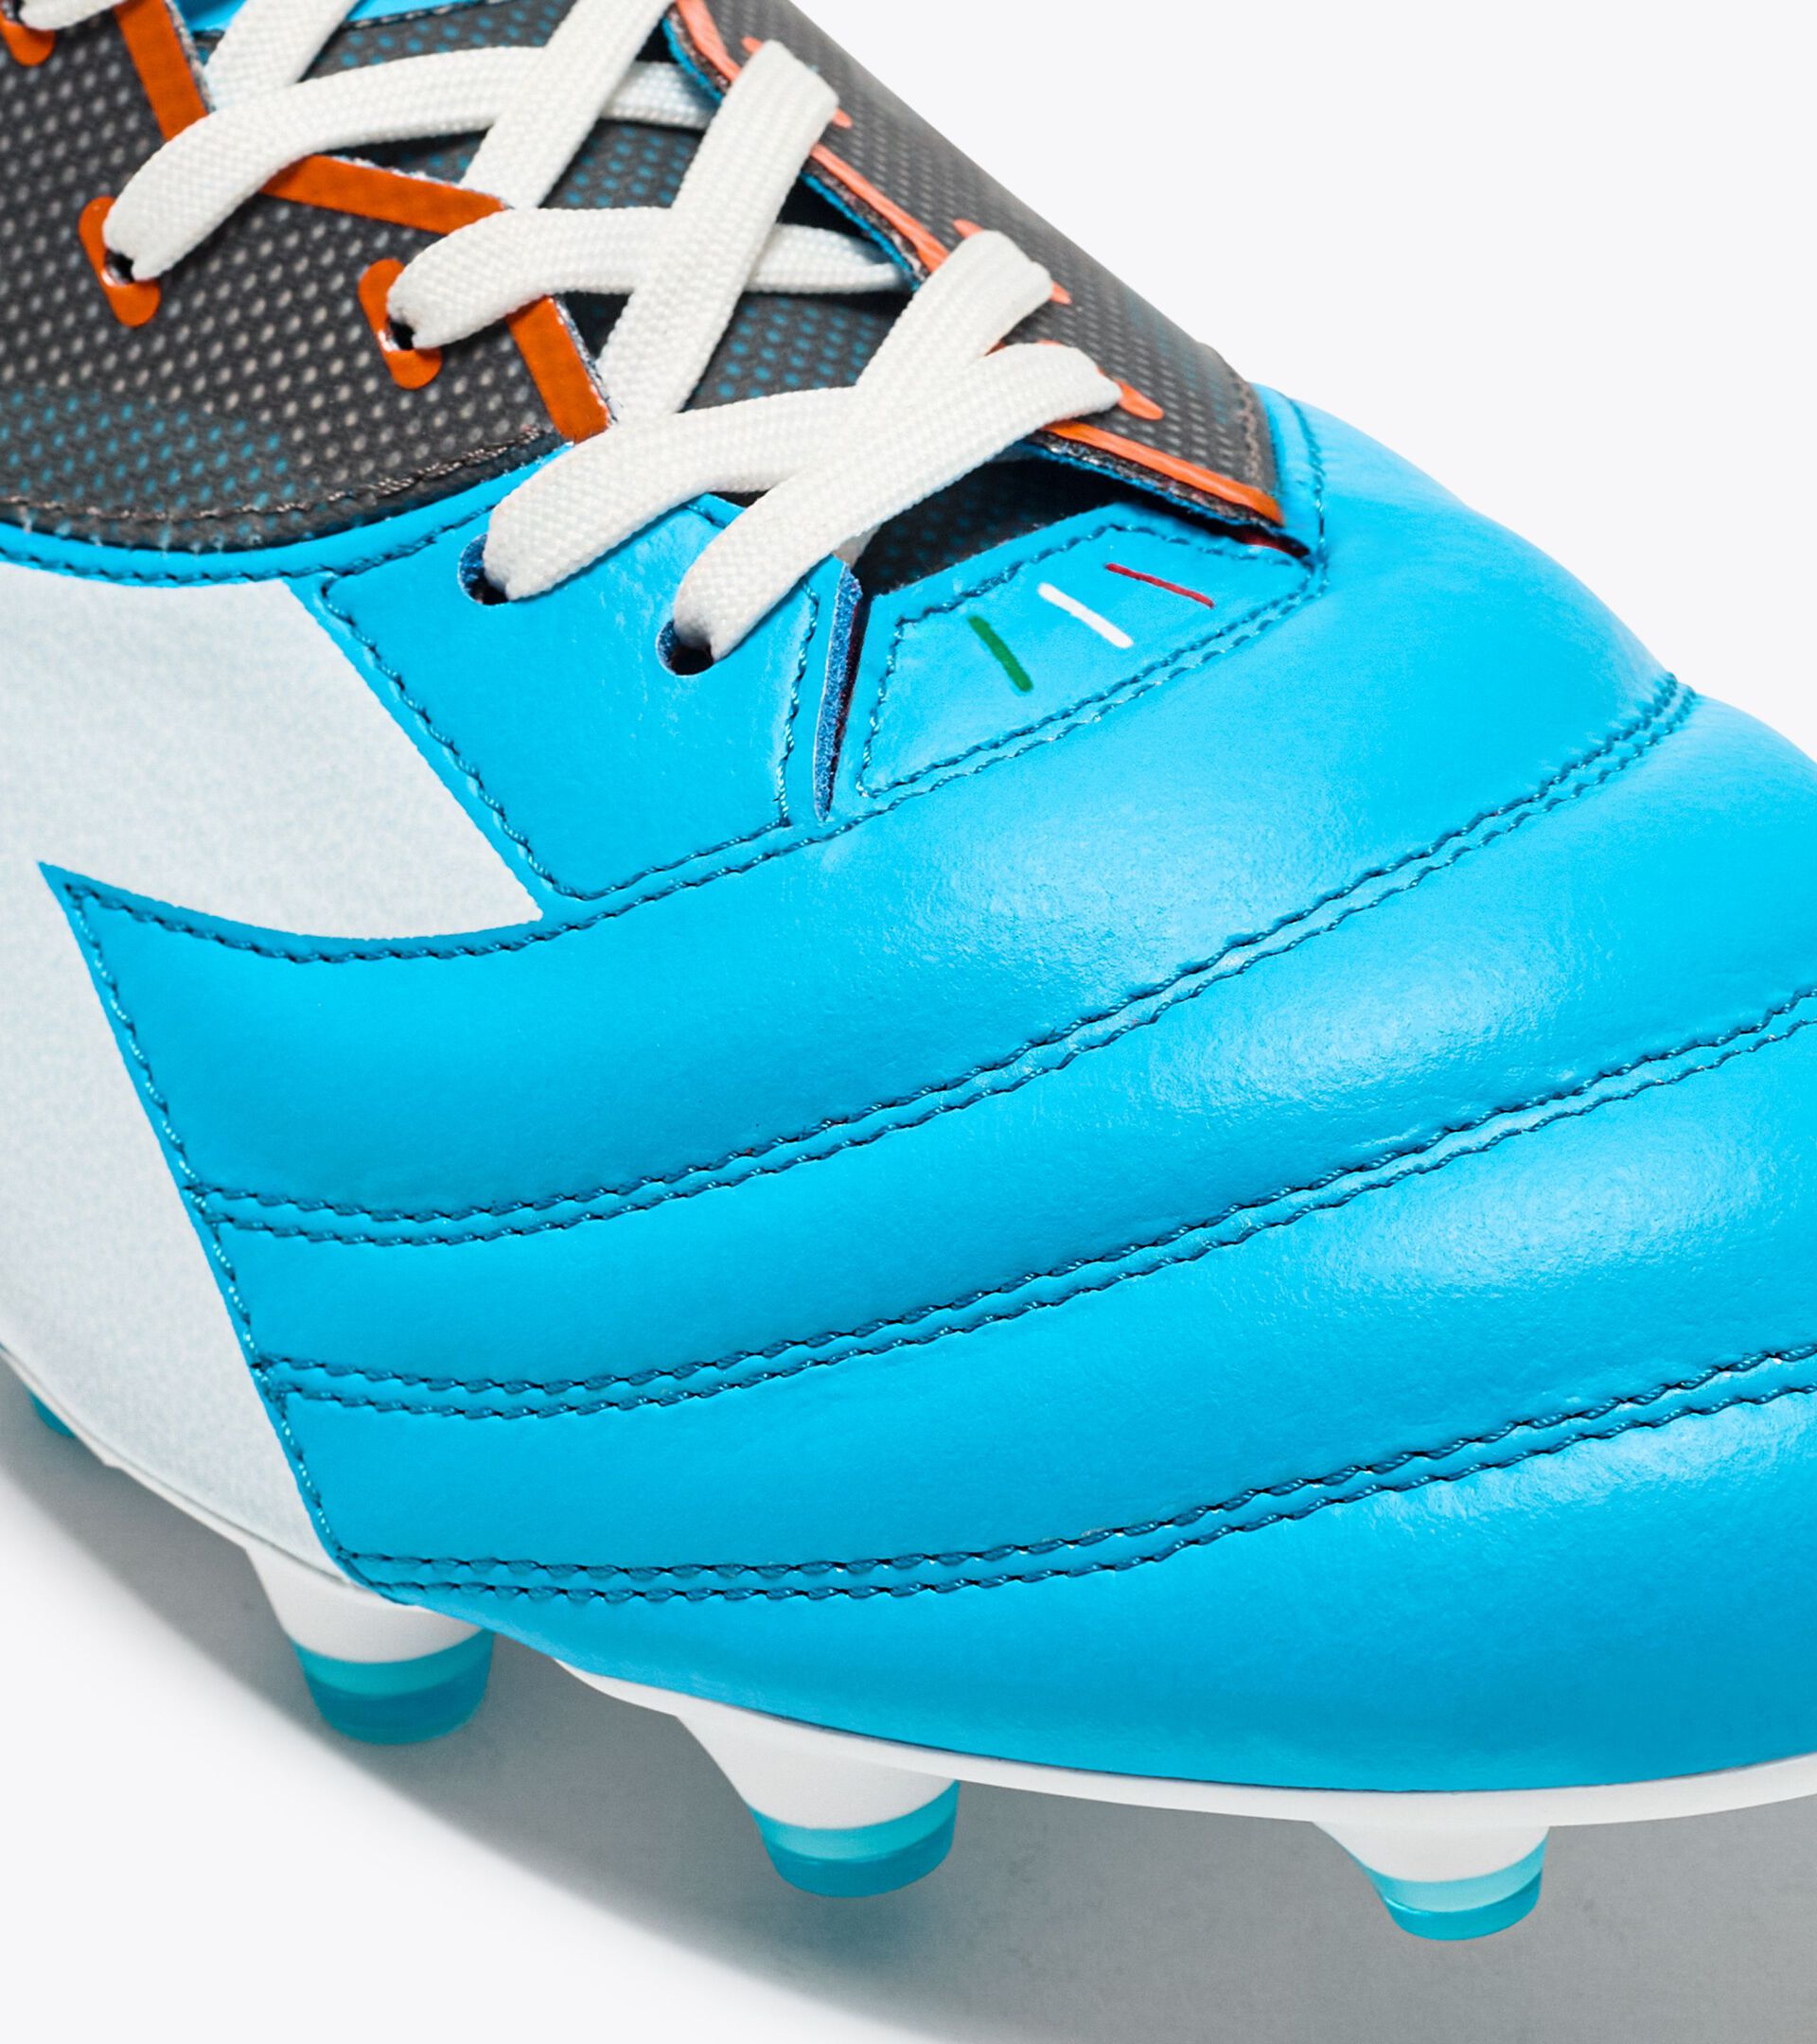 Calcio boots for firm grounds - Made in Italy - Gender Neutral BRASIL ELITE VELOCE GR ITA LPX BLUE FLUO/WHITE/ORANGE - Diadora